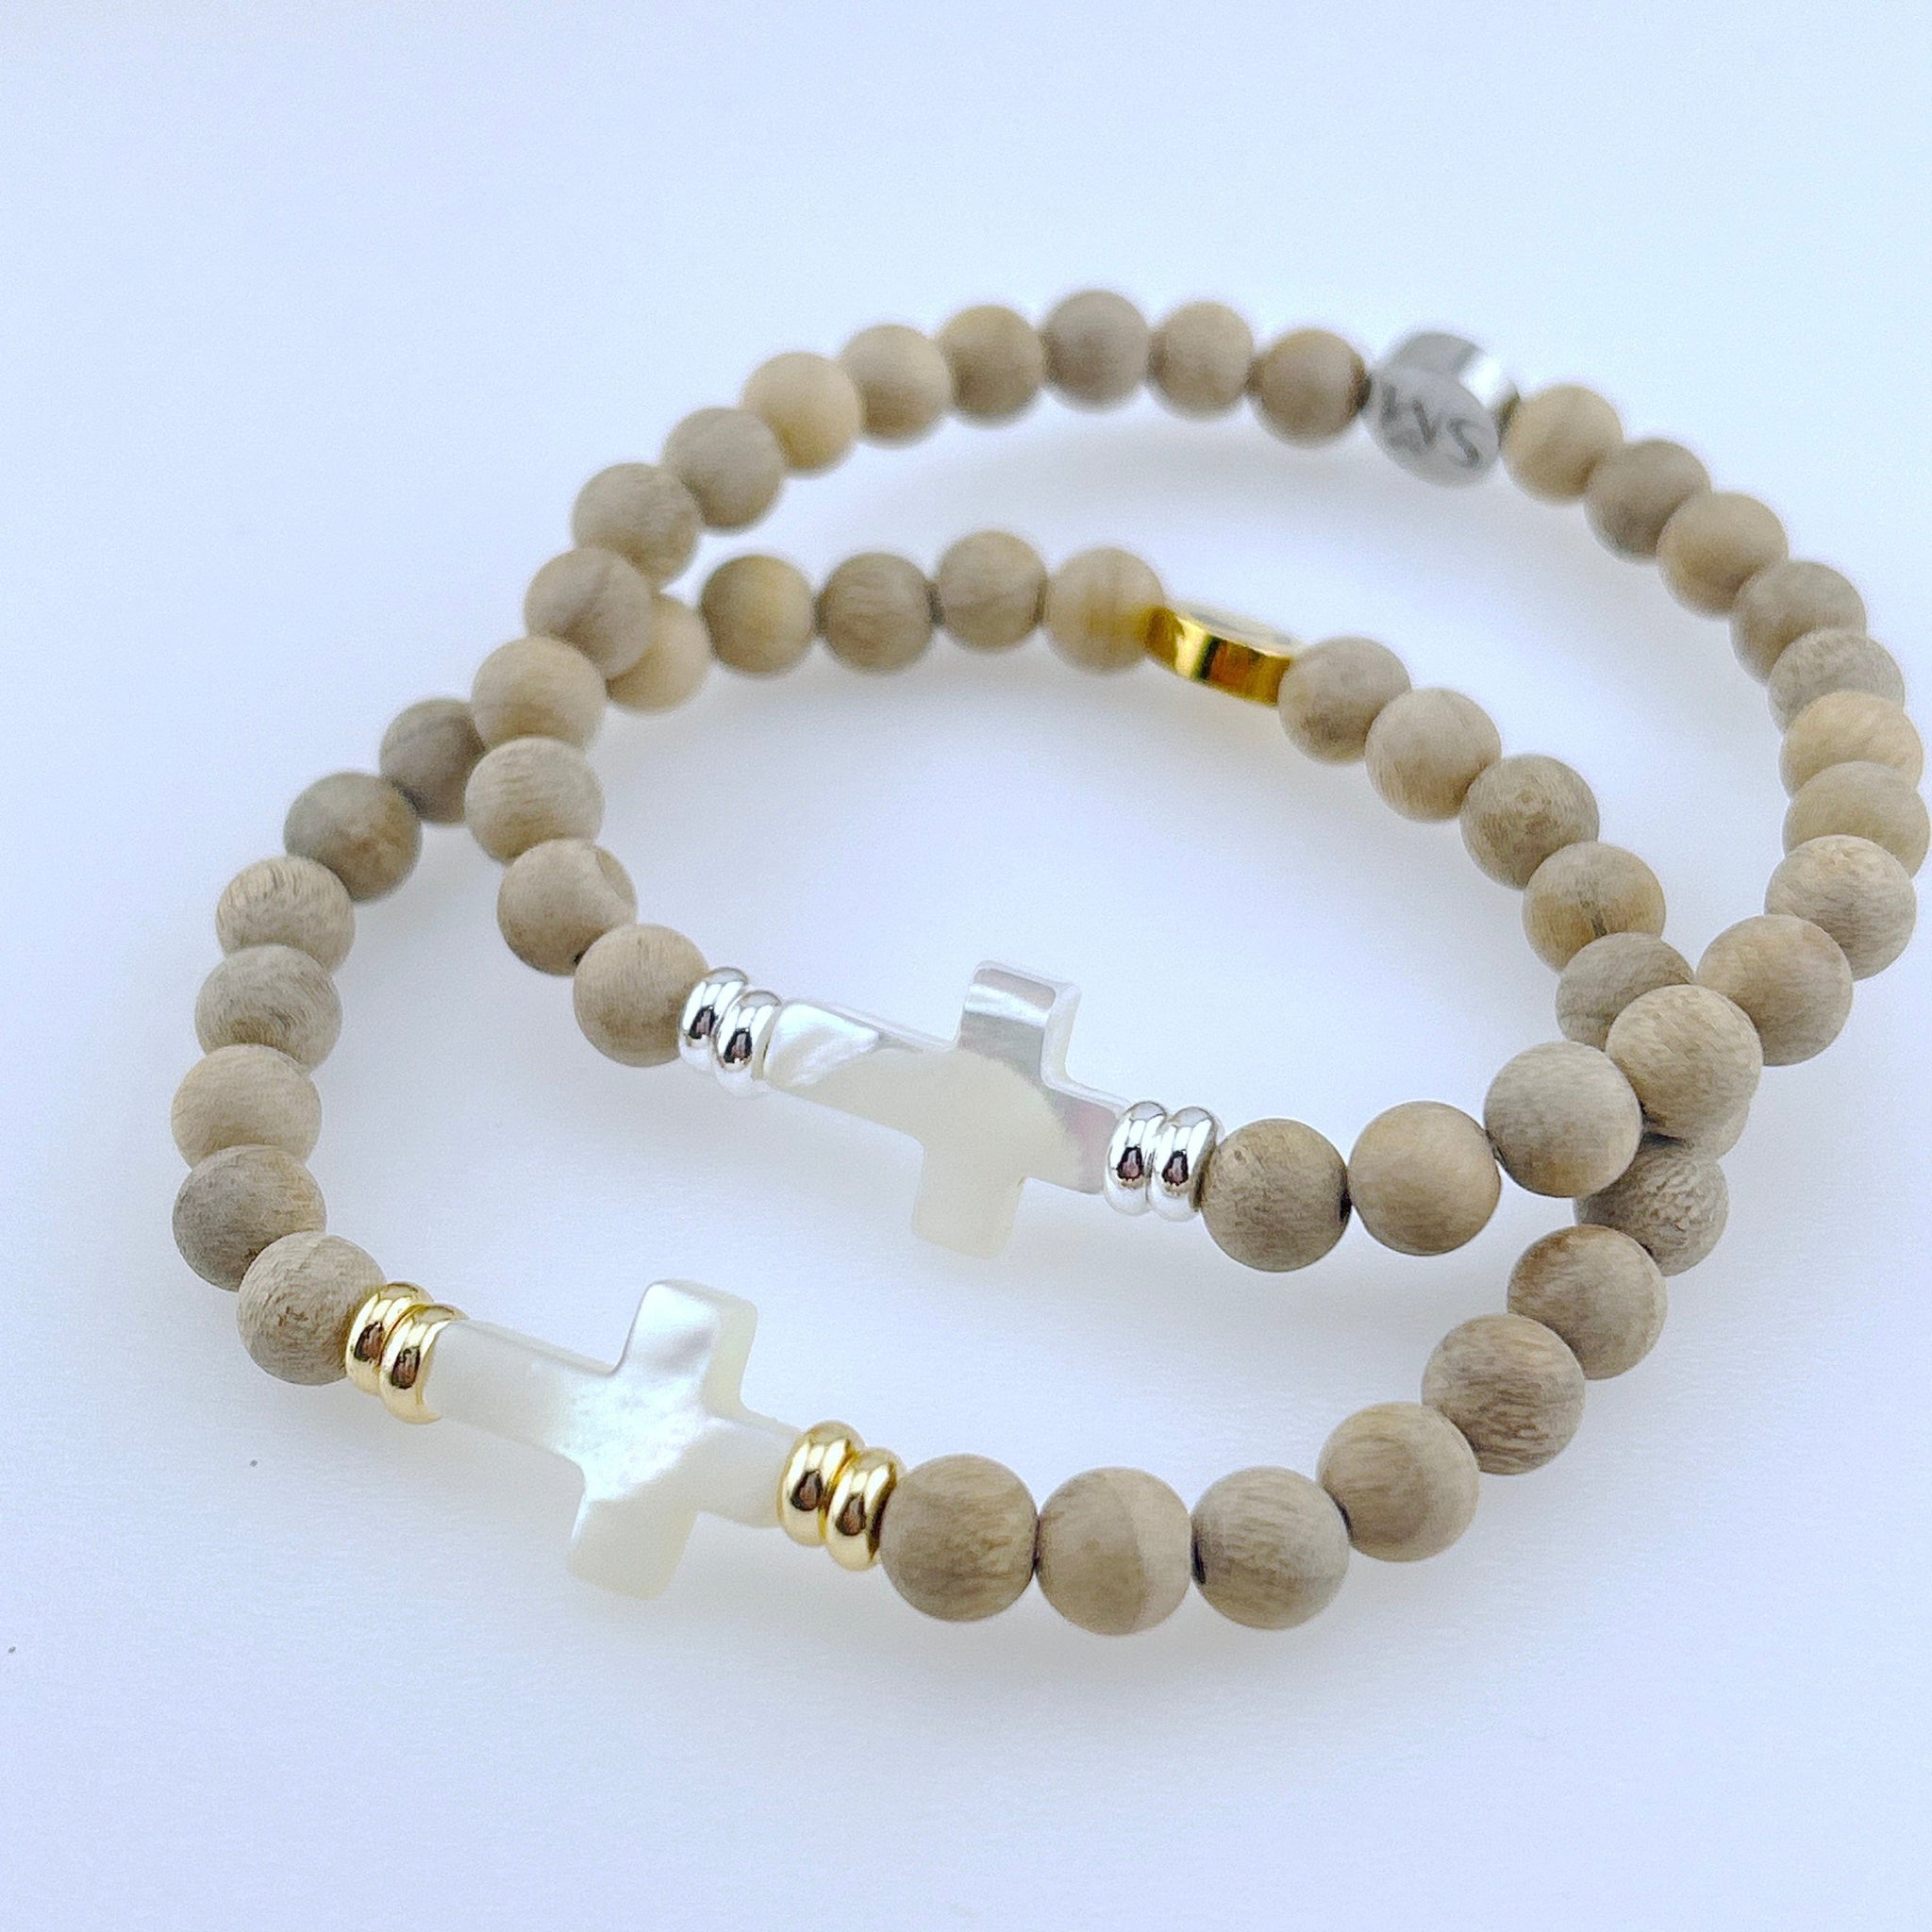 white background, 2 wooden bead bracelts stacked on top of each other, both with a mother of pearl cross, and one bracelet with gold bead accents and the other with silver bead accents.